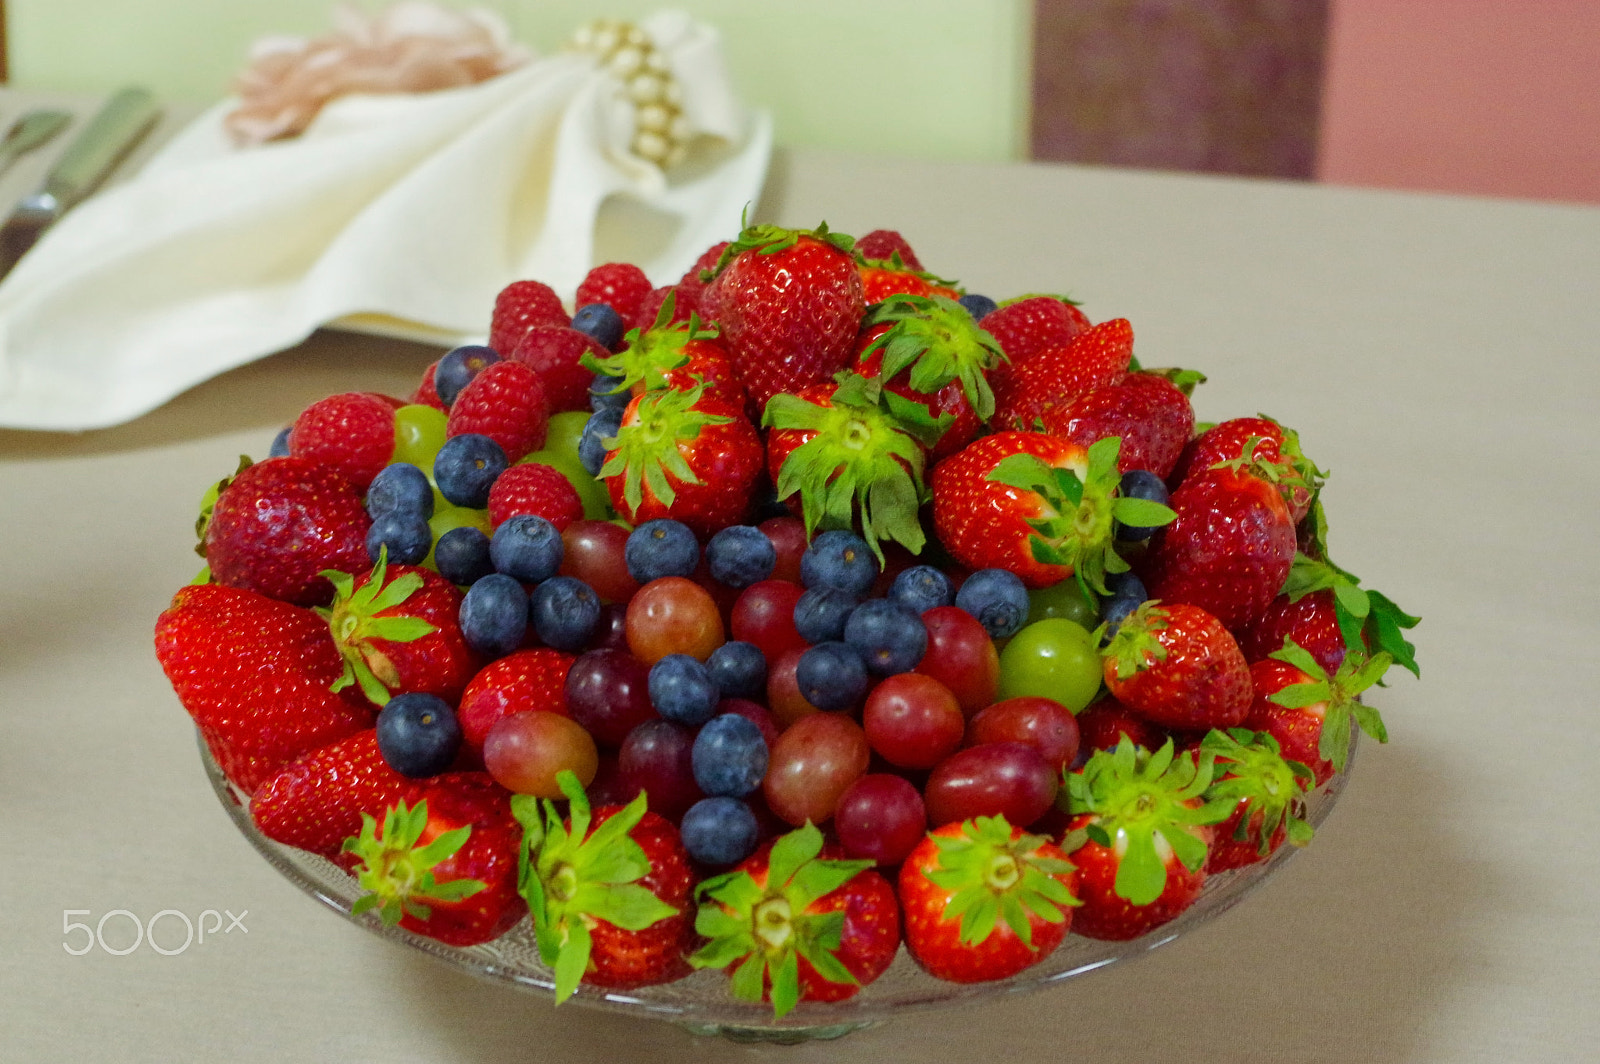 Pentax K-3 sample photo. Fresh berries, blueberry, strawberry, raspberry in a glas bowl plate on gray table photography